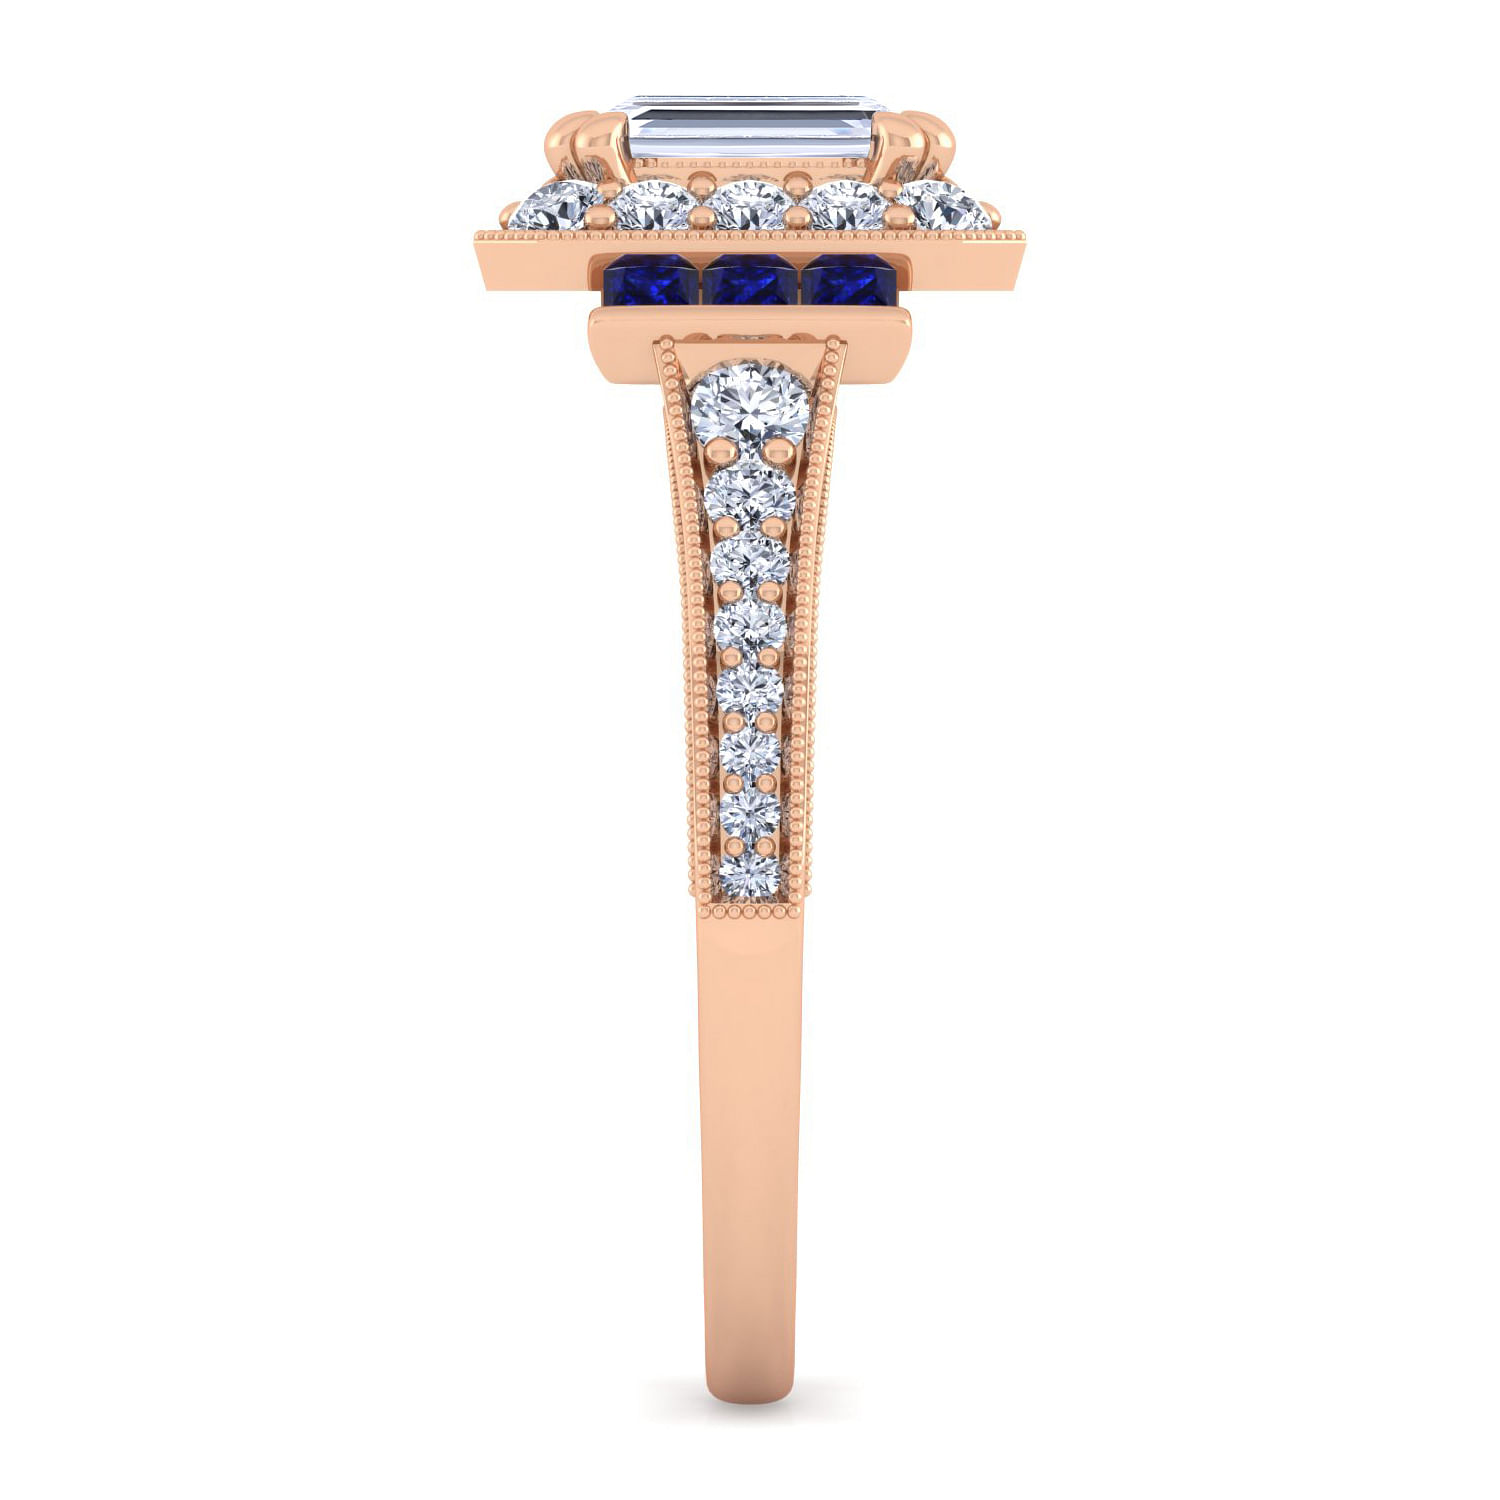 Vintage Inspired 14K Rose Gold Halo Emerald Cut Diamond and Sapphire Engagement Ring